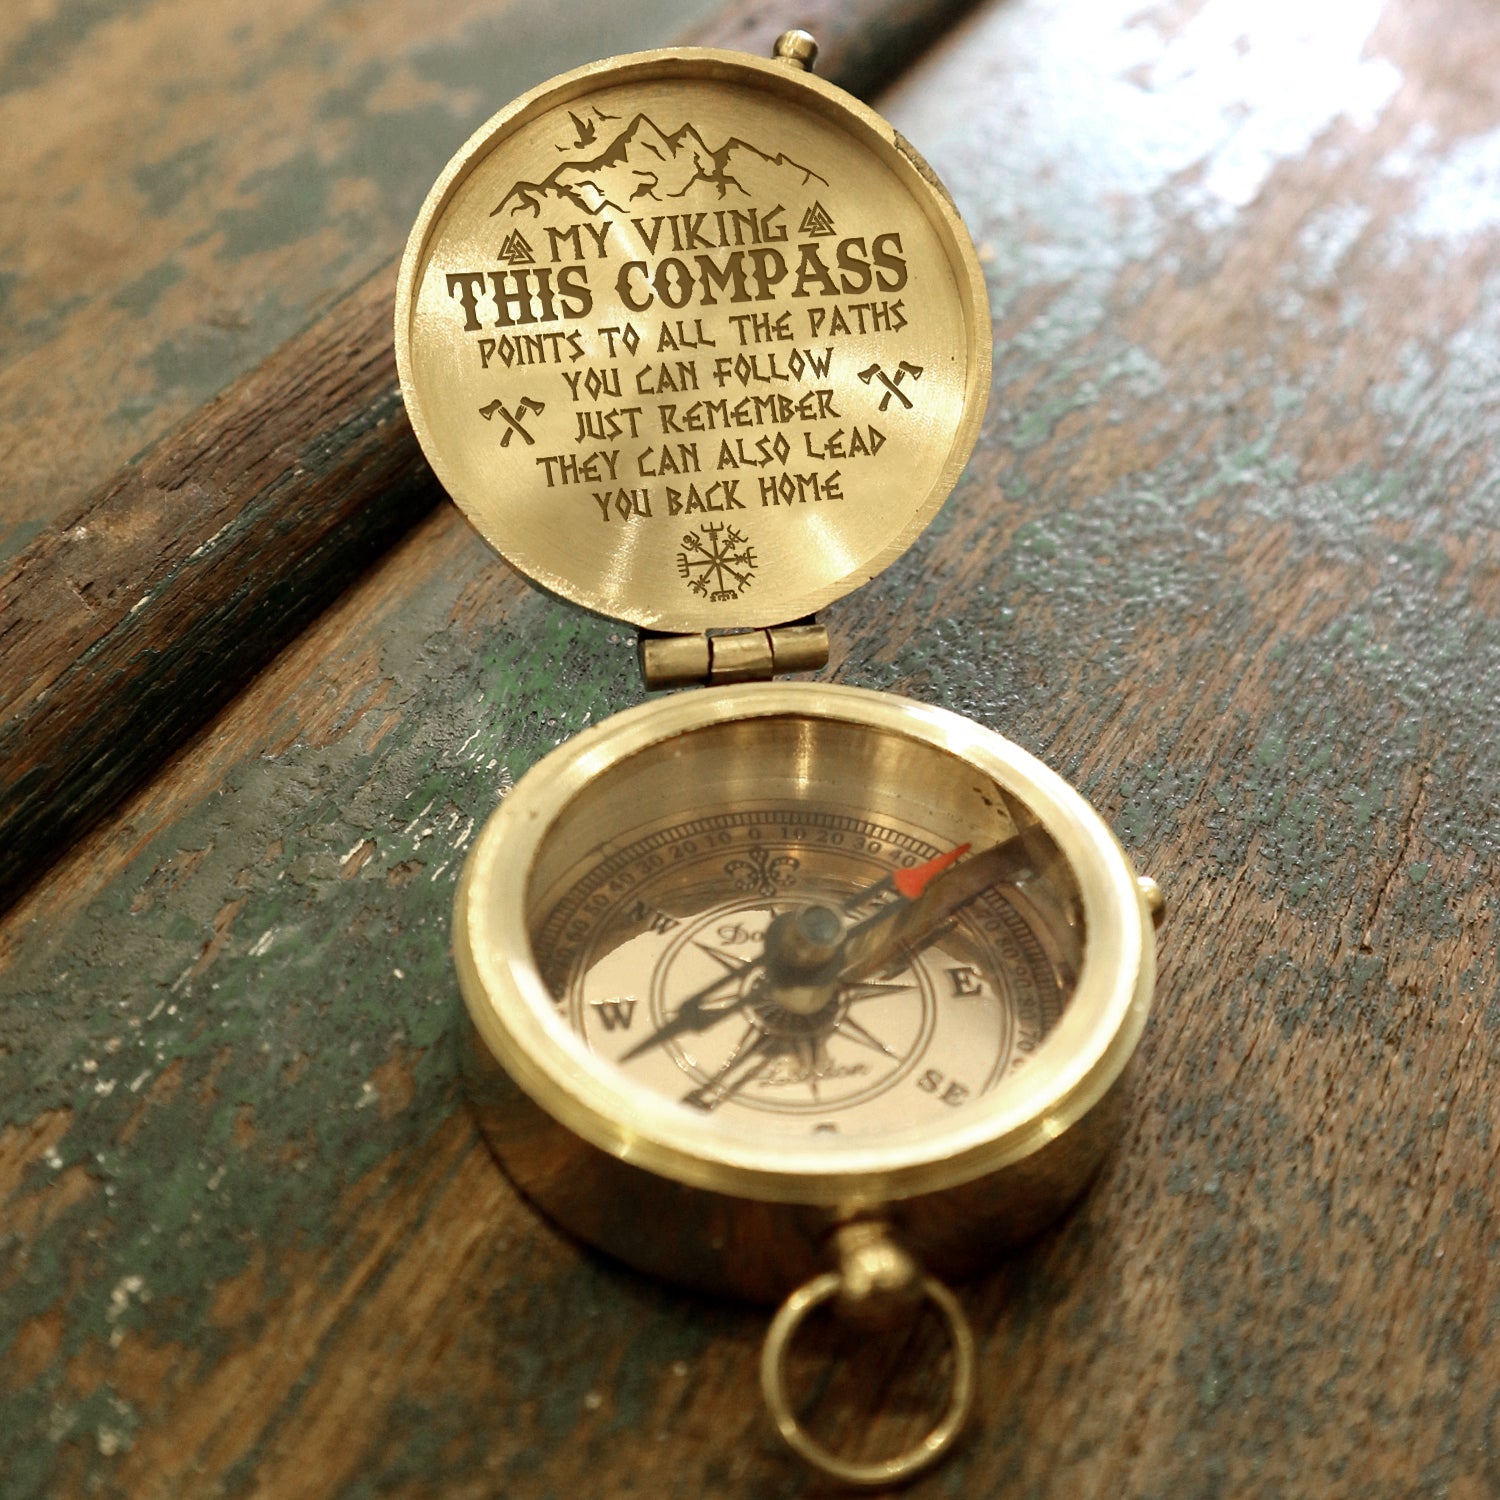 Engraved Compass - Viking - To My Man - They Can Also Lead You Back Home - Ukgpb26065